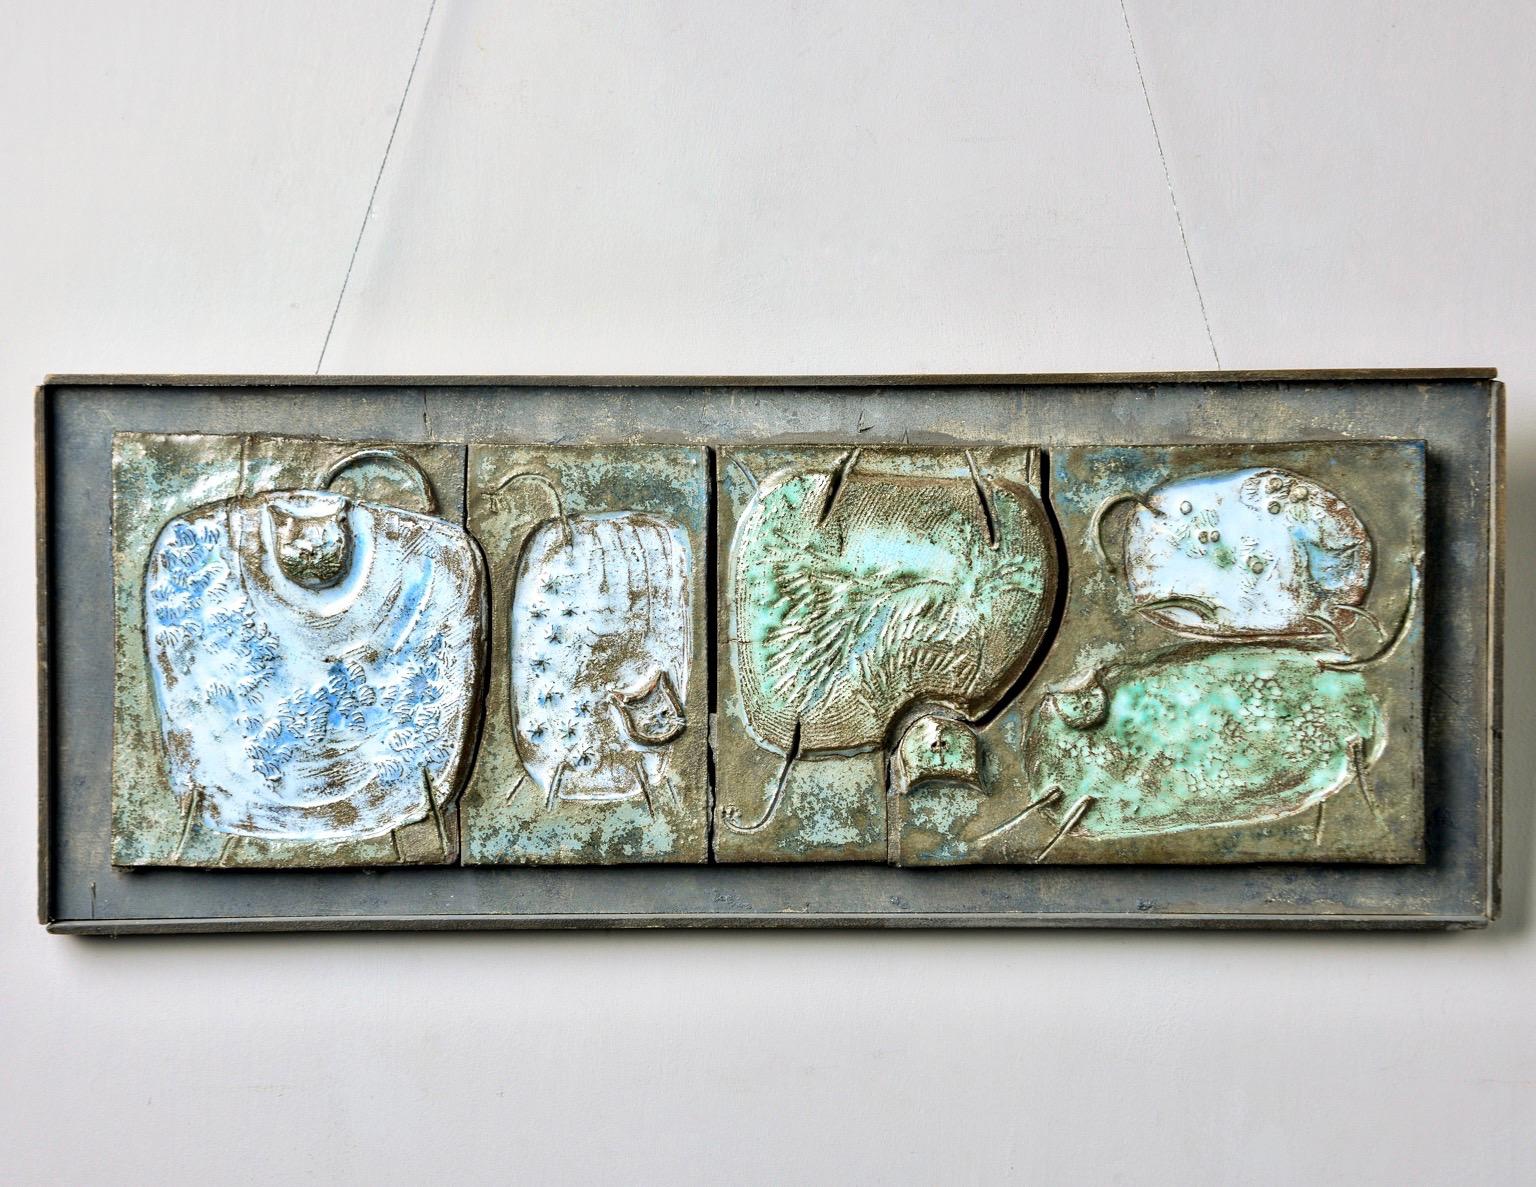 Found in Belgium, this circa 1960s ceramic plaque is glazed in tones of green and blue and mounted upon a dark gray painted wooden frame . The ceramic plaque features four etched abstract cats with some elements rendered in relief. Unsigned -